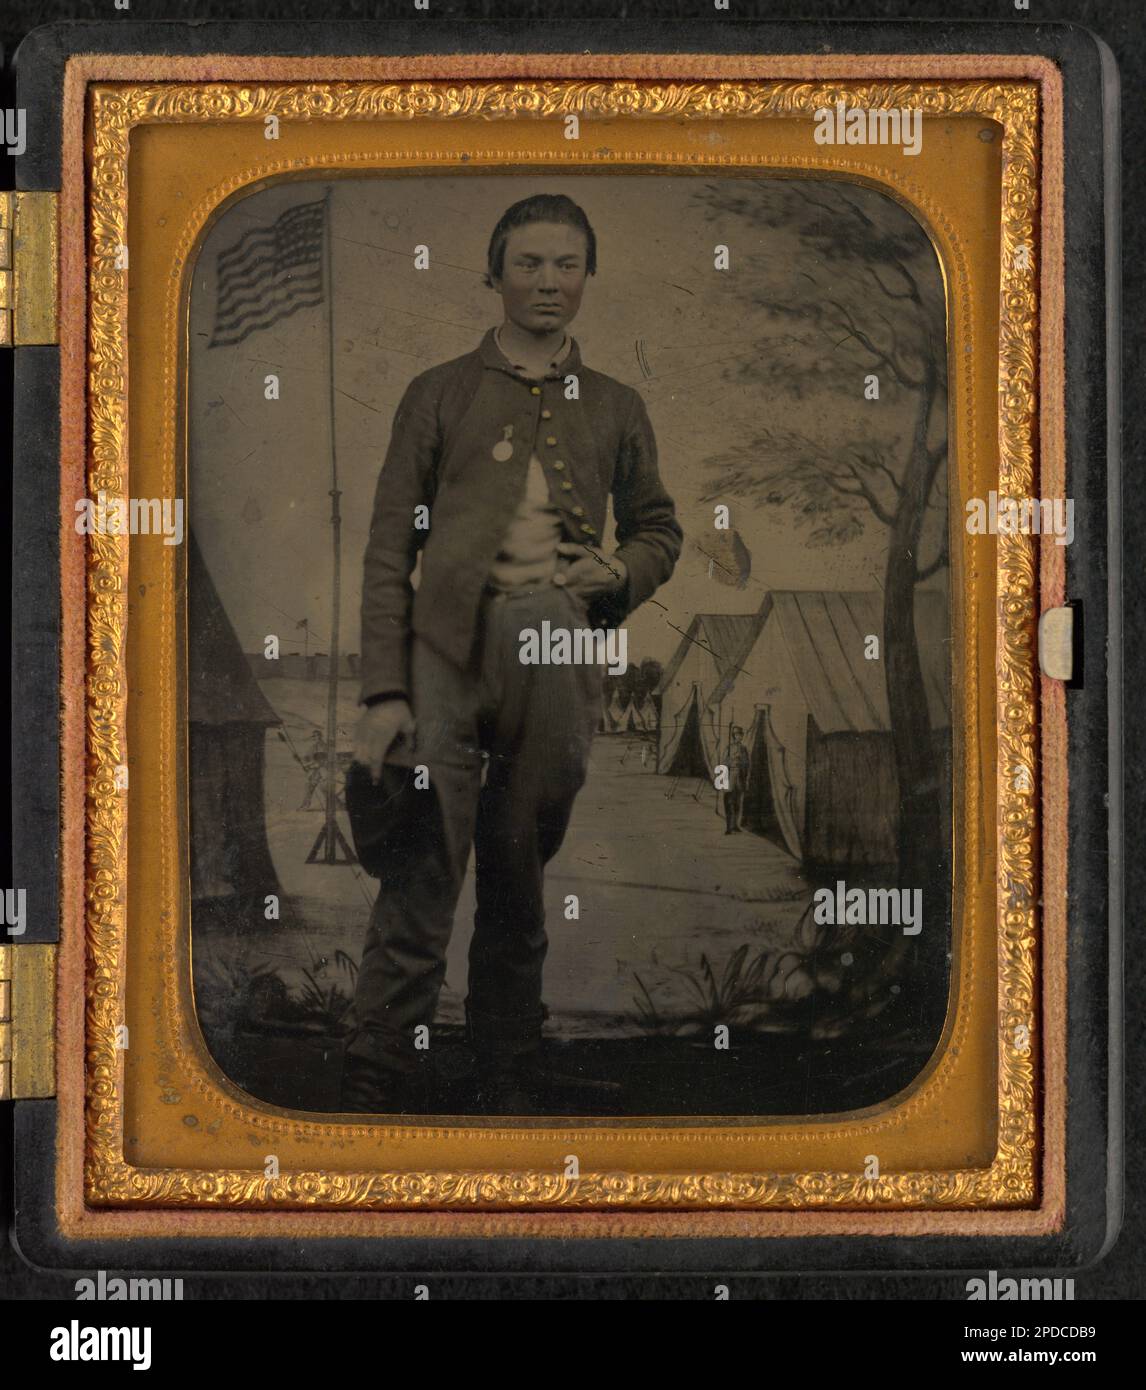 Private Henry Baker of Co. H, 141st Pennsylvania Infantry Regiment in uniform in front of painted backdrop showing military camp. Liljenquist Family Collection of Civil War Photographs , FAmbrotype/Tintype photograph filing series , pp/liljunion. Baker, William, 1844-1941, United States, Army, Pennsylvania Infantry Regiment, 141st (1862-1865), People, Soldiers, Union, 1860-1870, Military uniforms, Union, 1860-1870, Backdrops, 1860-1870, United States, History, Civil War, 1861-1865, Military personnel, Union. Stock Photo